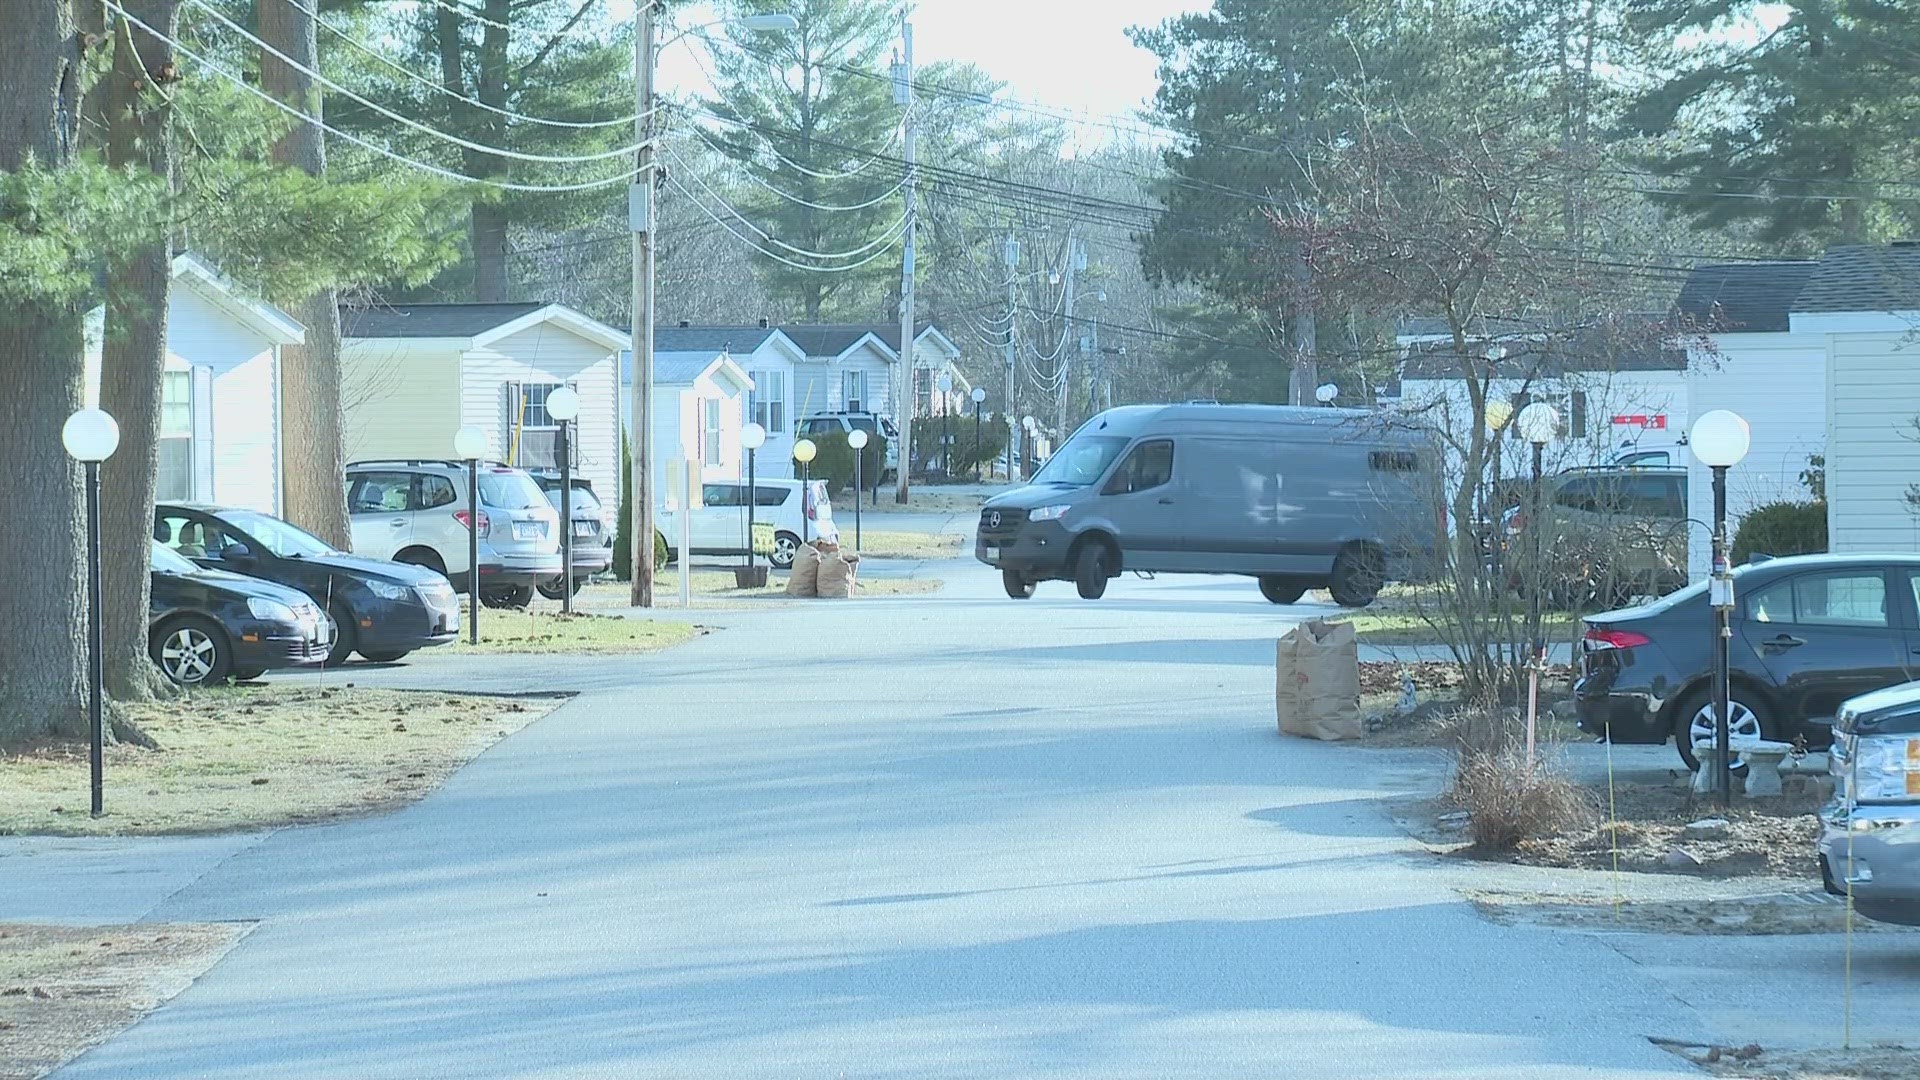 Tenants living at Old Orchard Village and Atlantic Village fear a new owner could try to price them out.